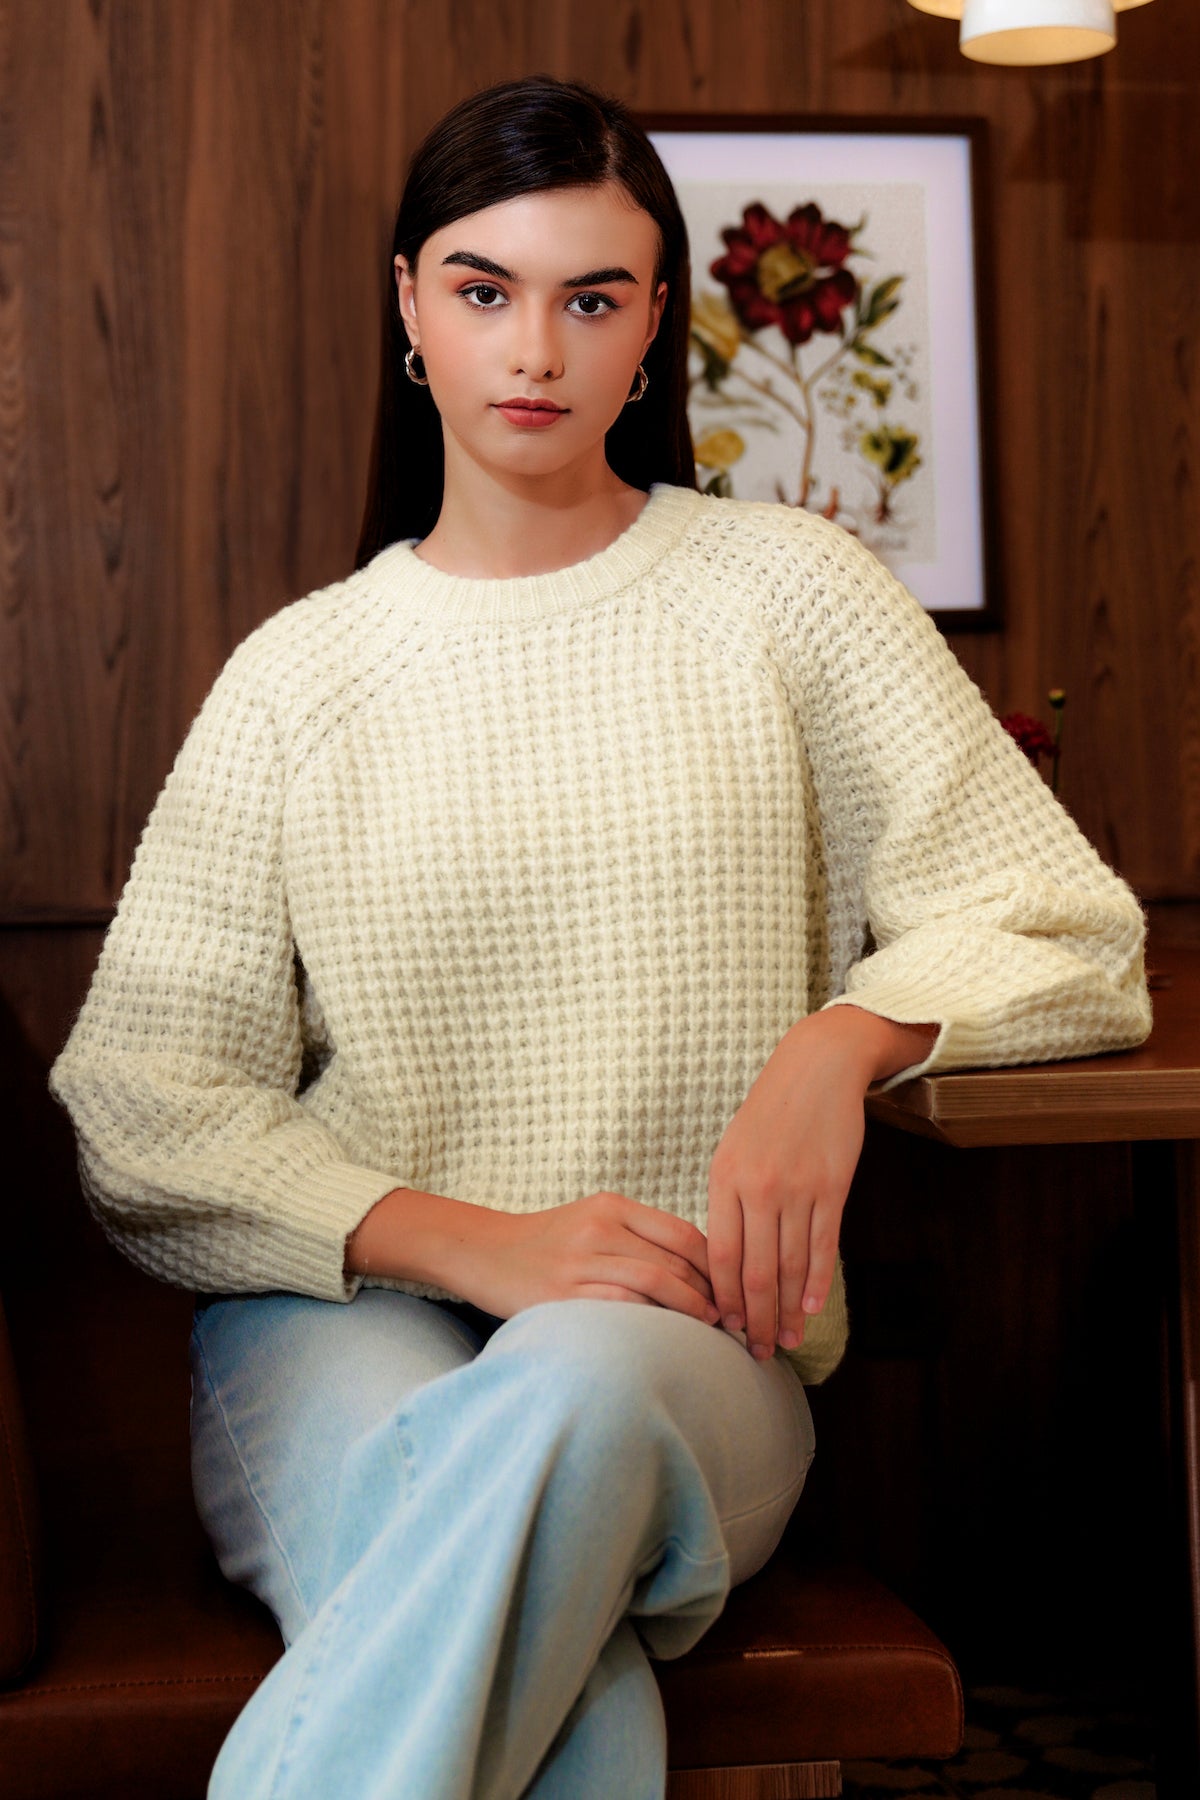 Willow Knit Sweater - White